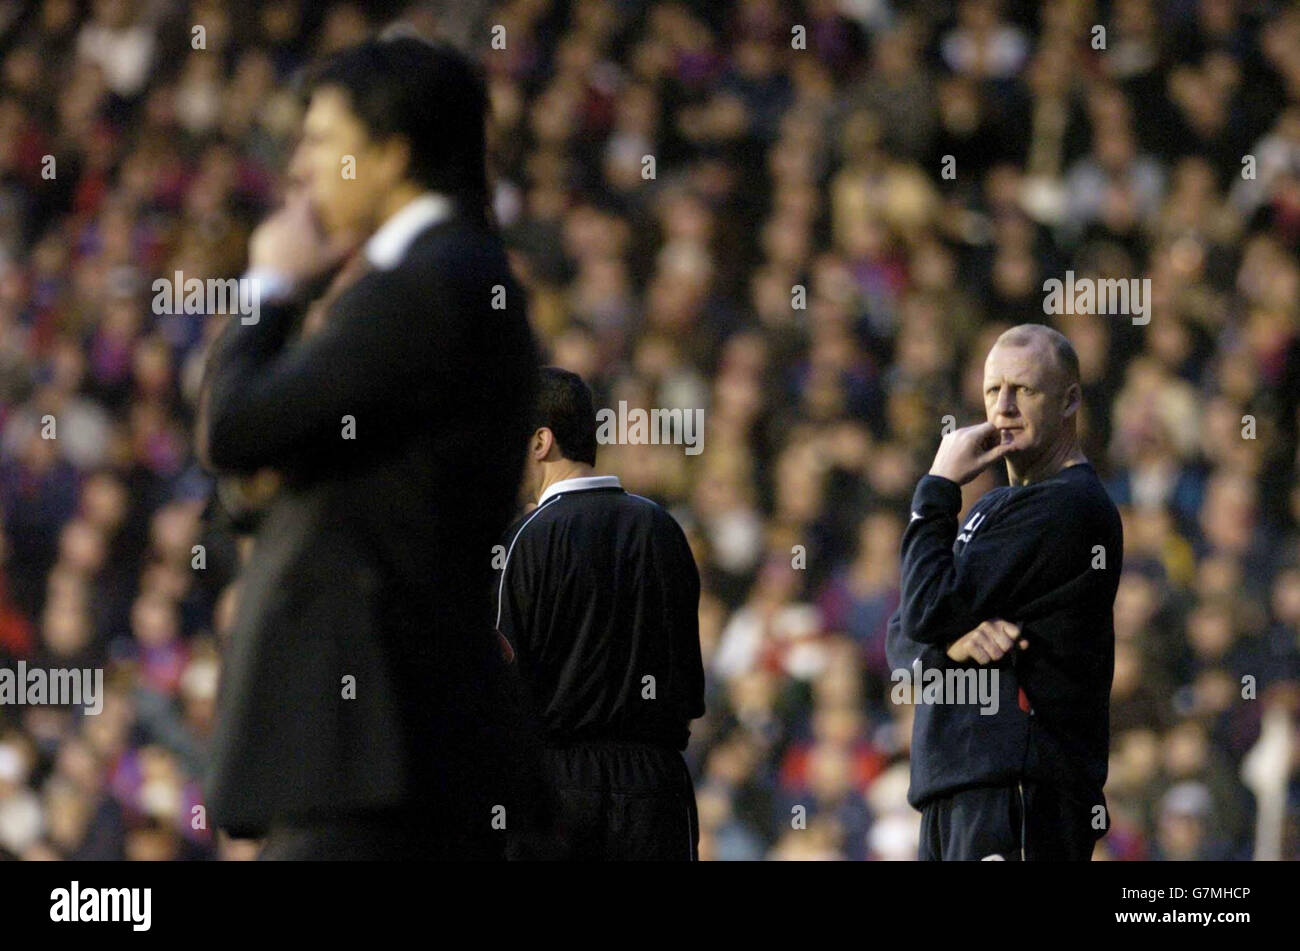 Barclays Premiership Fulham v Crystal Palace - Craven Cottage. Crystal Palace manager Ian Dowie (right) looks on. Stock Photo